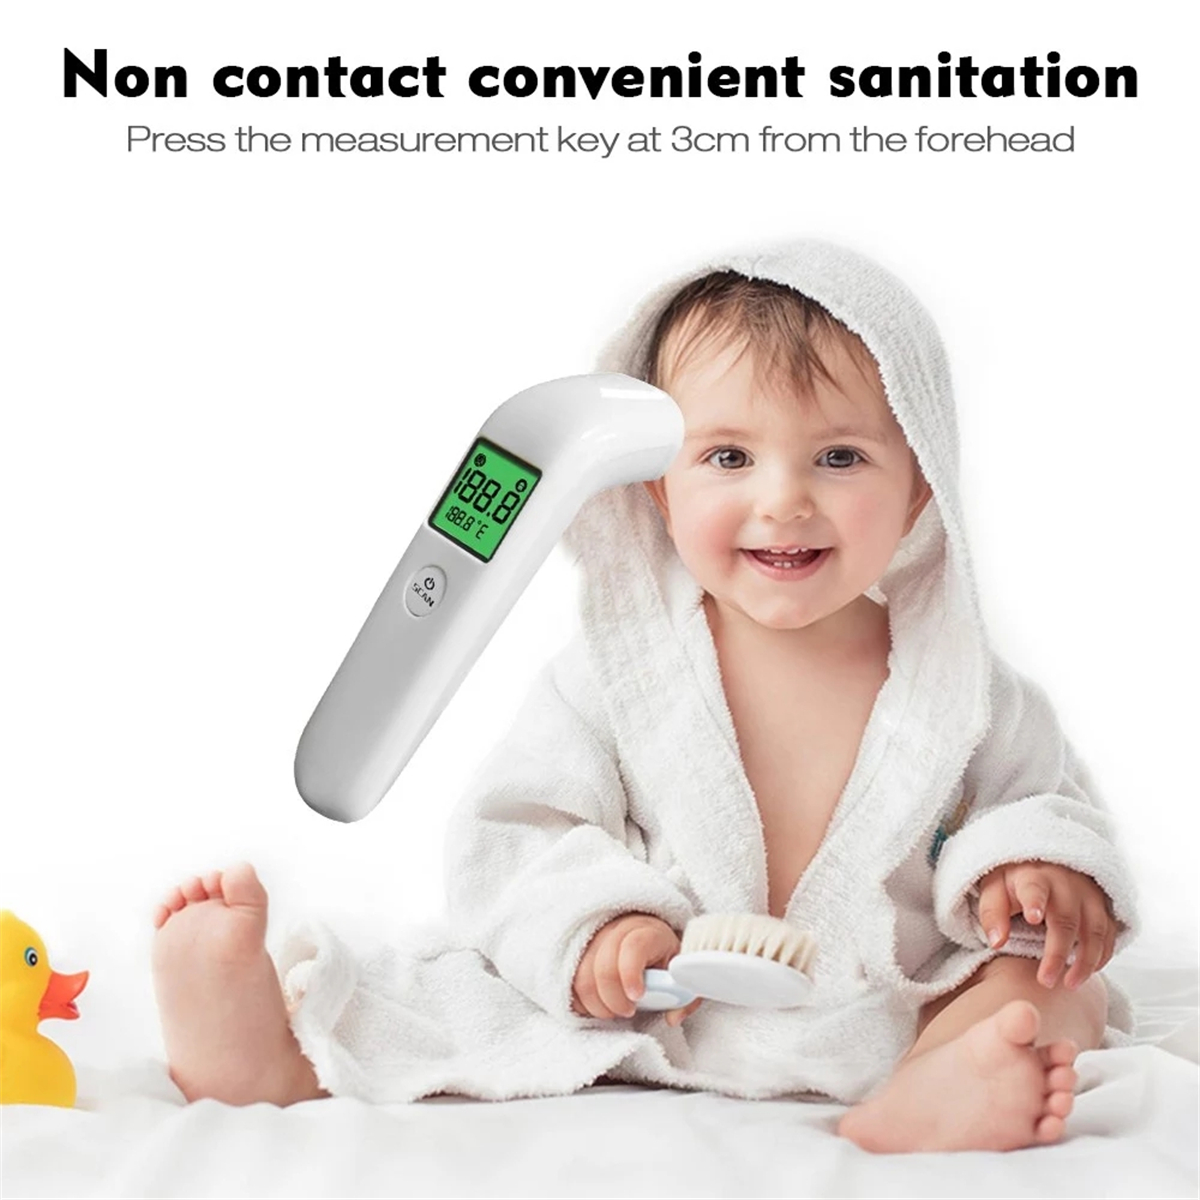 Portable-Non-contact-LCD-Digital-Thermometer-Infrared-Forehead-Thermometer-Adult-Body-Baby-Temperatu-1654884-4